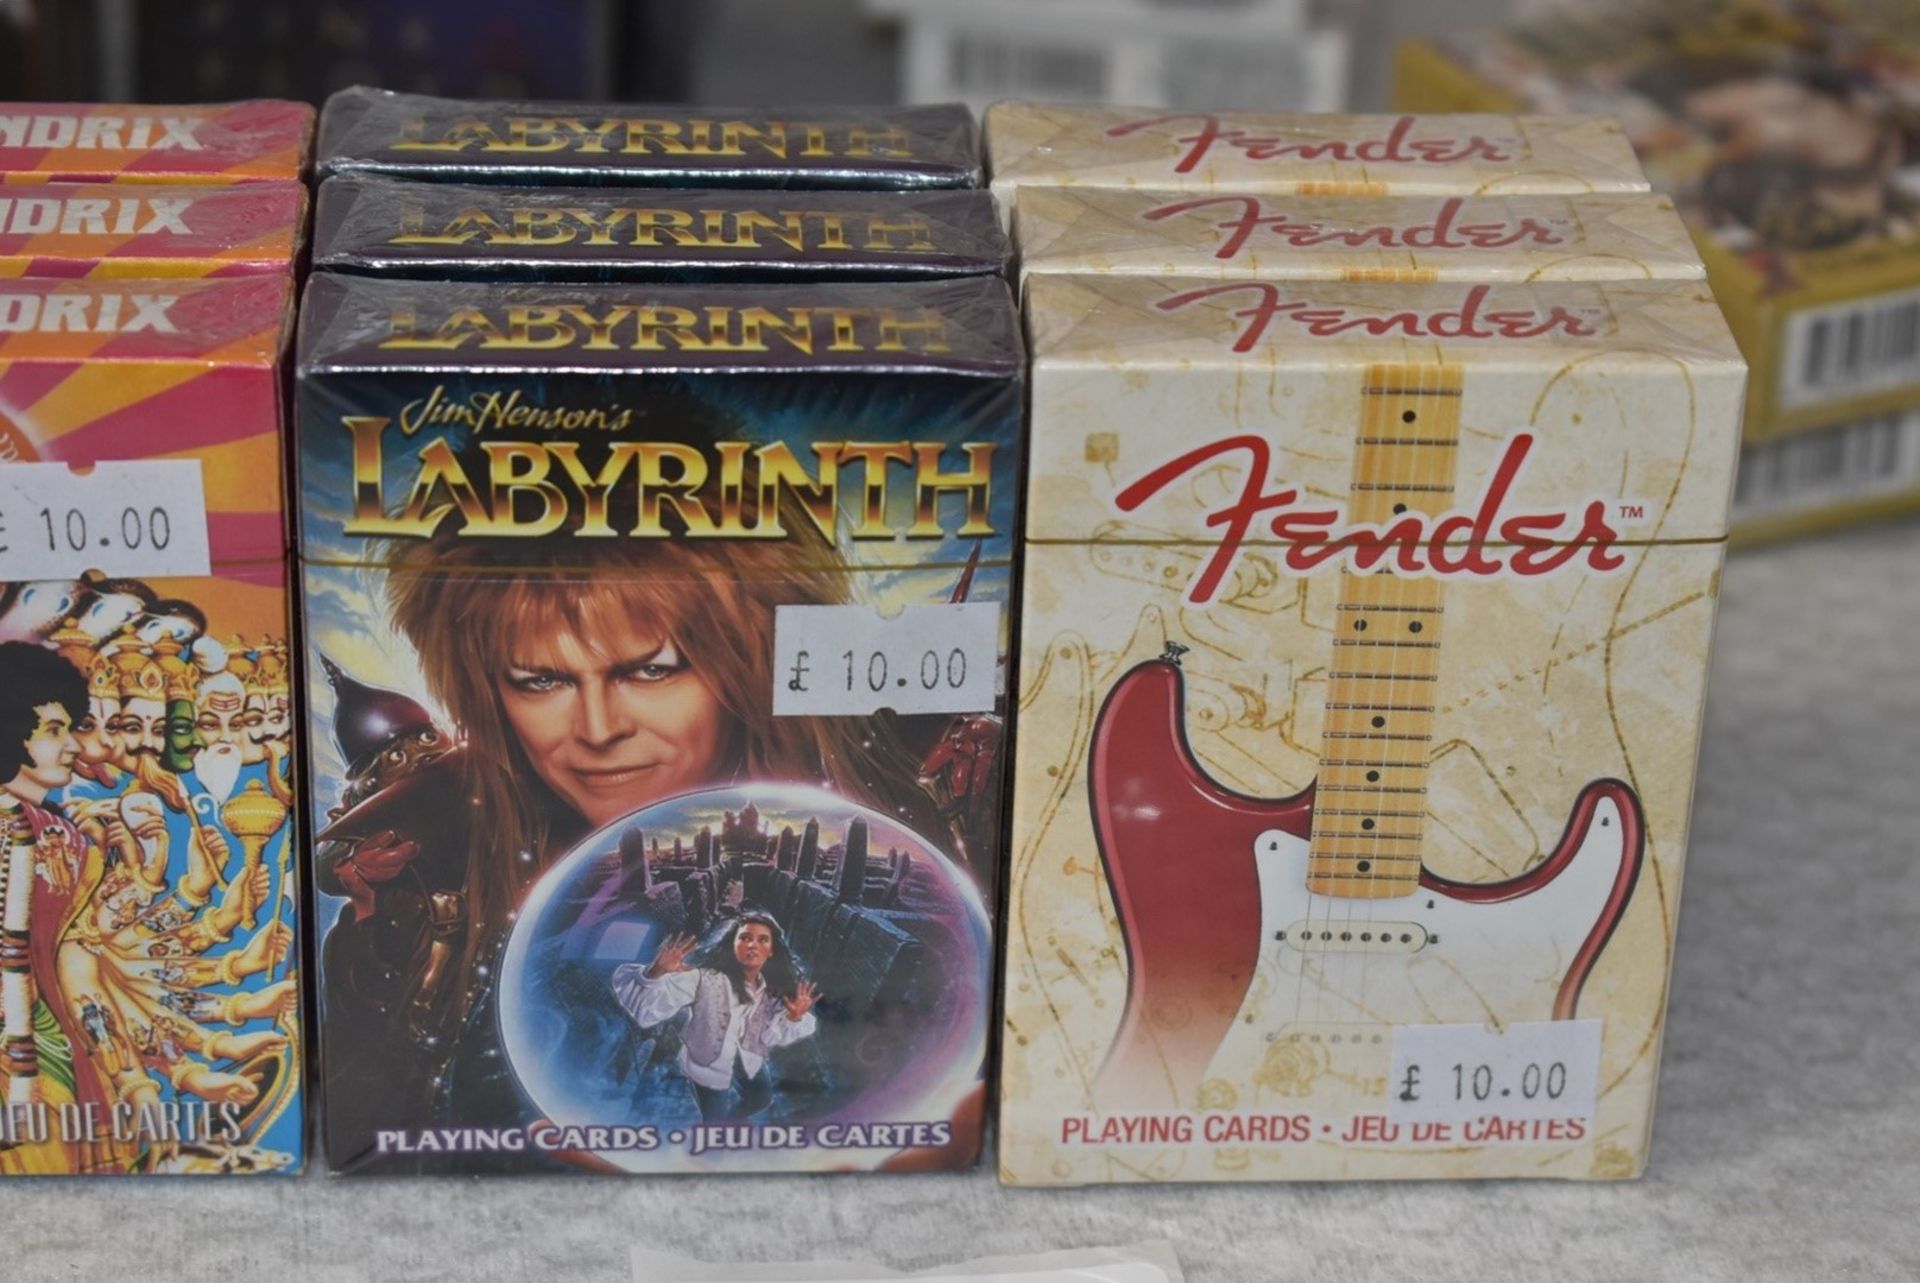 12 x Packs of Themed Playing Cards Featuring Jimi Hendrix, Fender, Labyrinth & Kiss - RRP £120 - Image 3 of 7